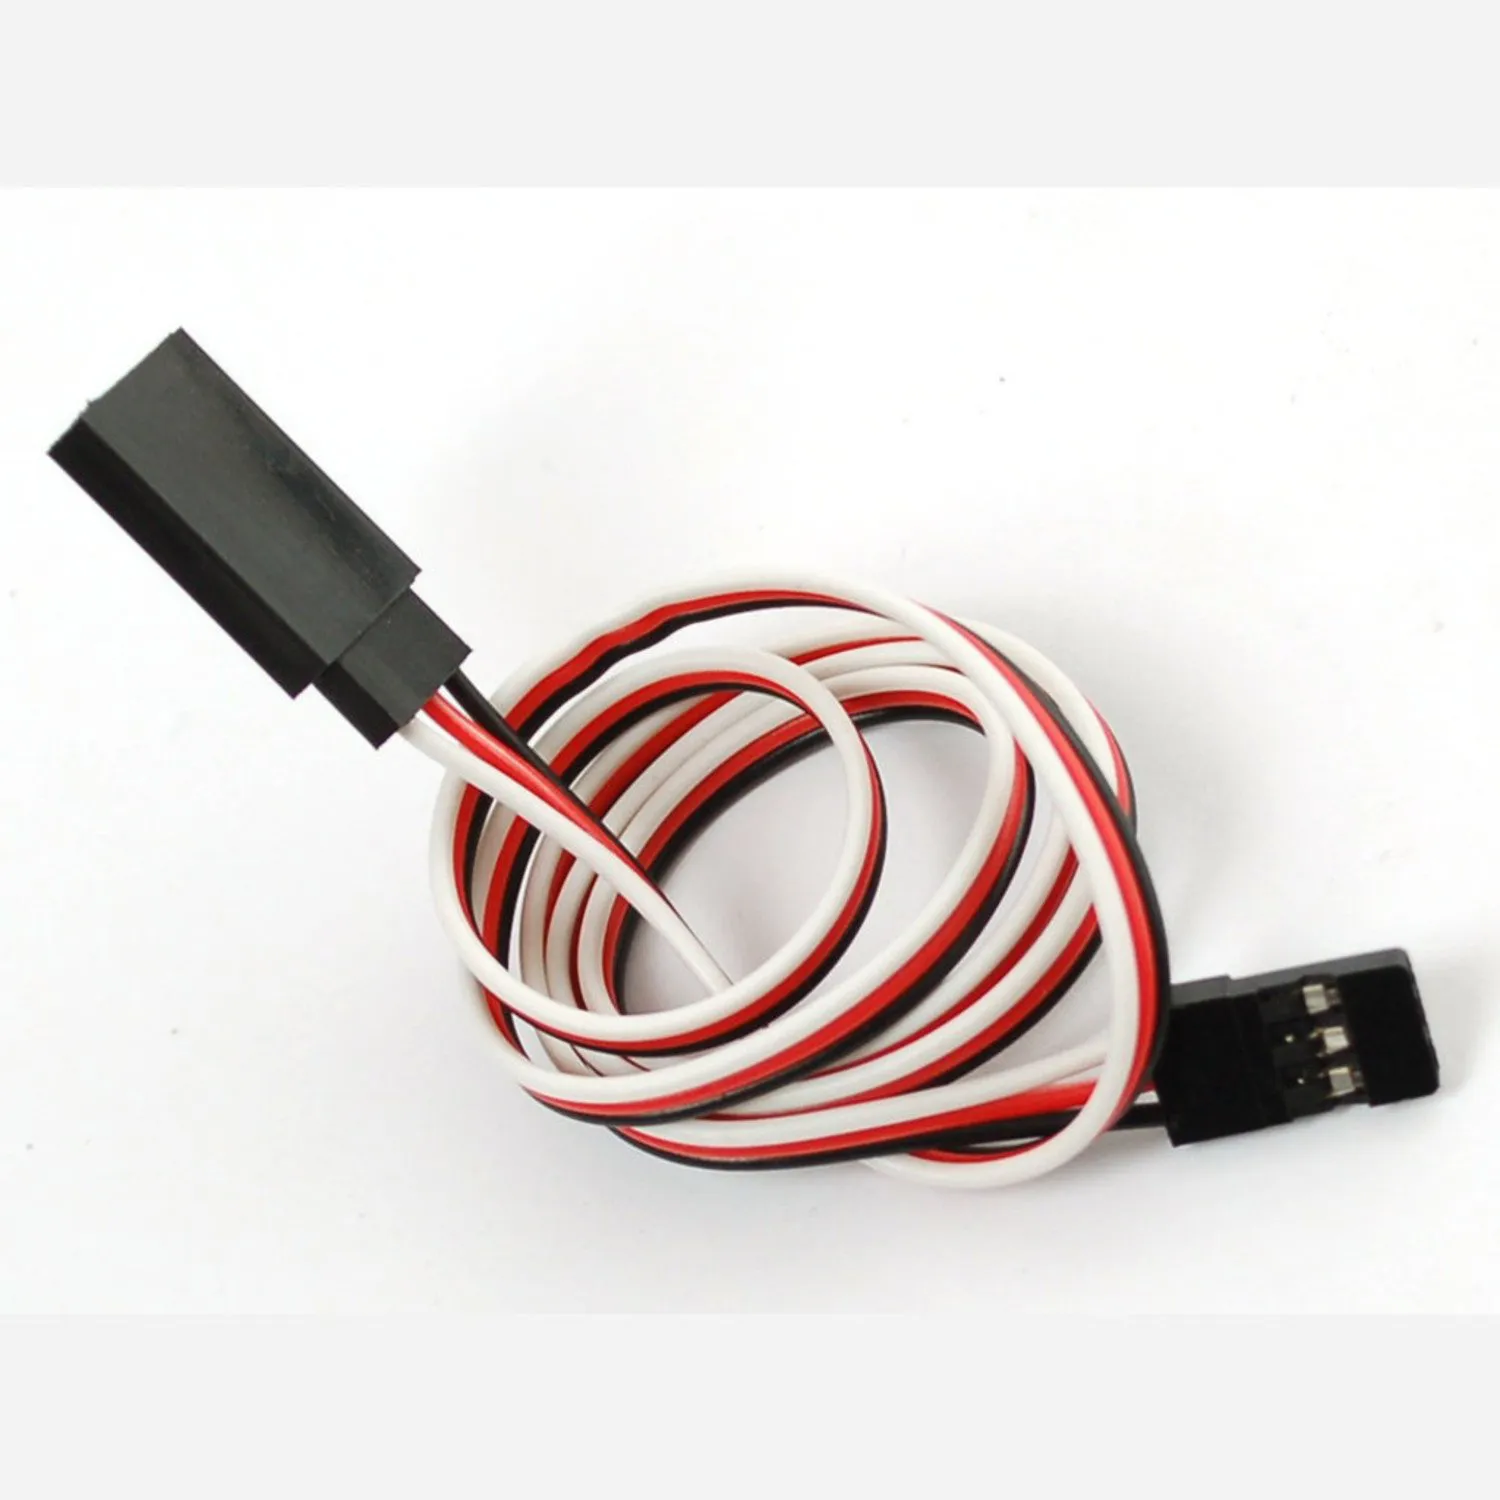 Photo of Servo Extension Cable - 50cm / 19.5 long